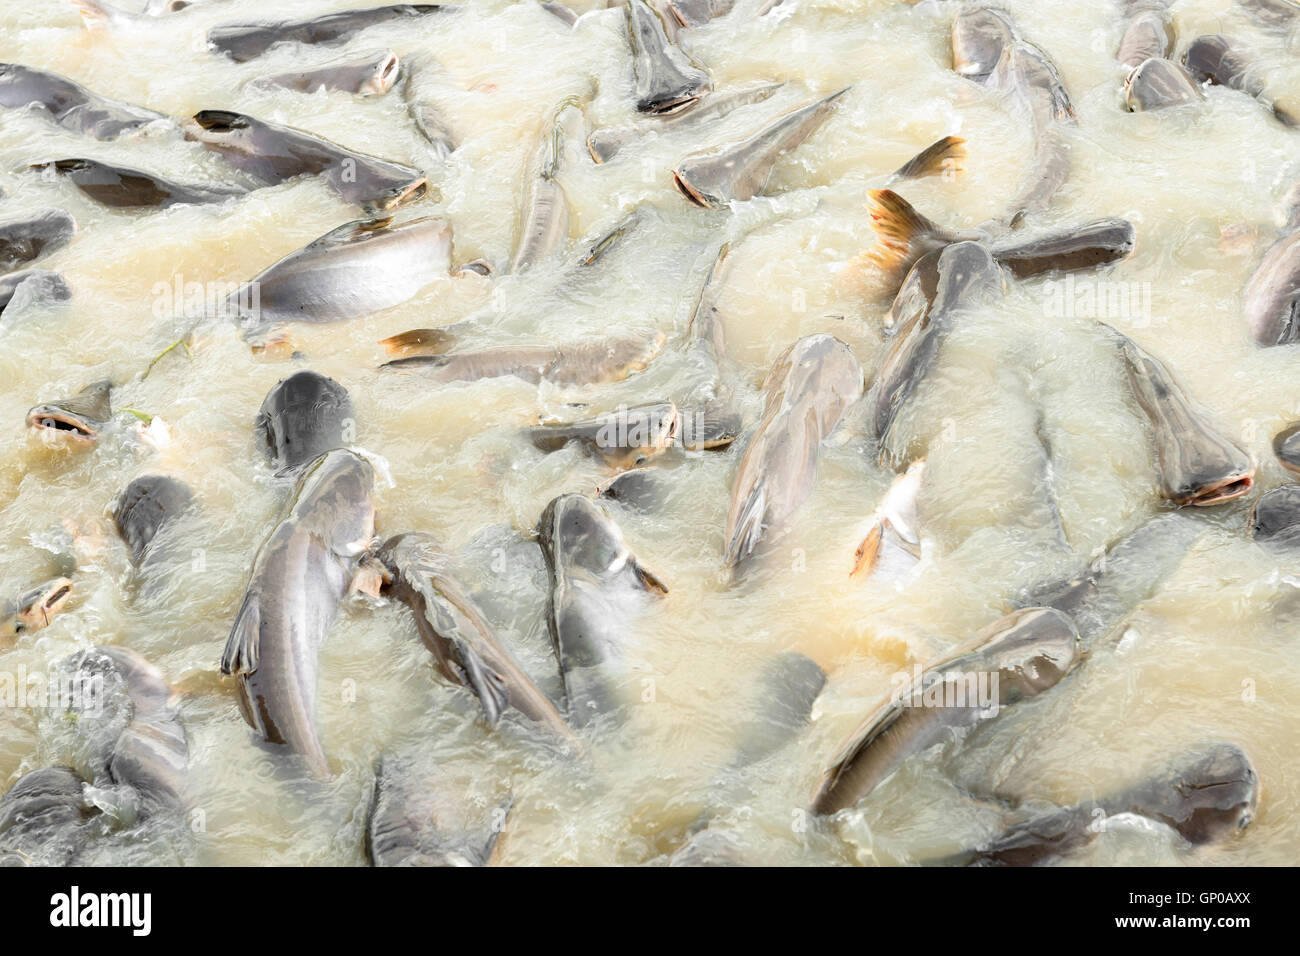 fish in the canal, pangasius, catfish, striped snakehead fish. Stock Photo